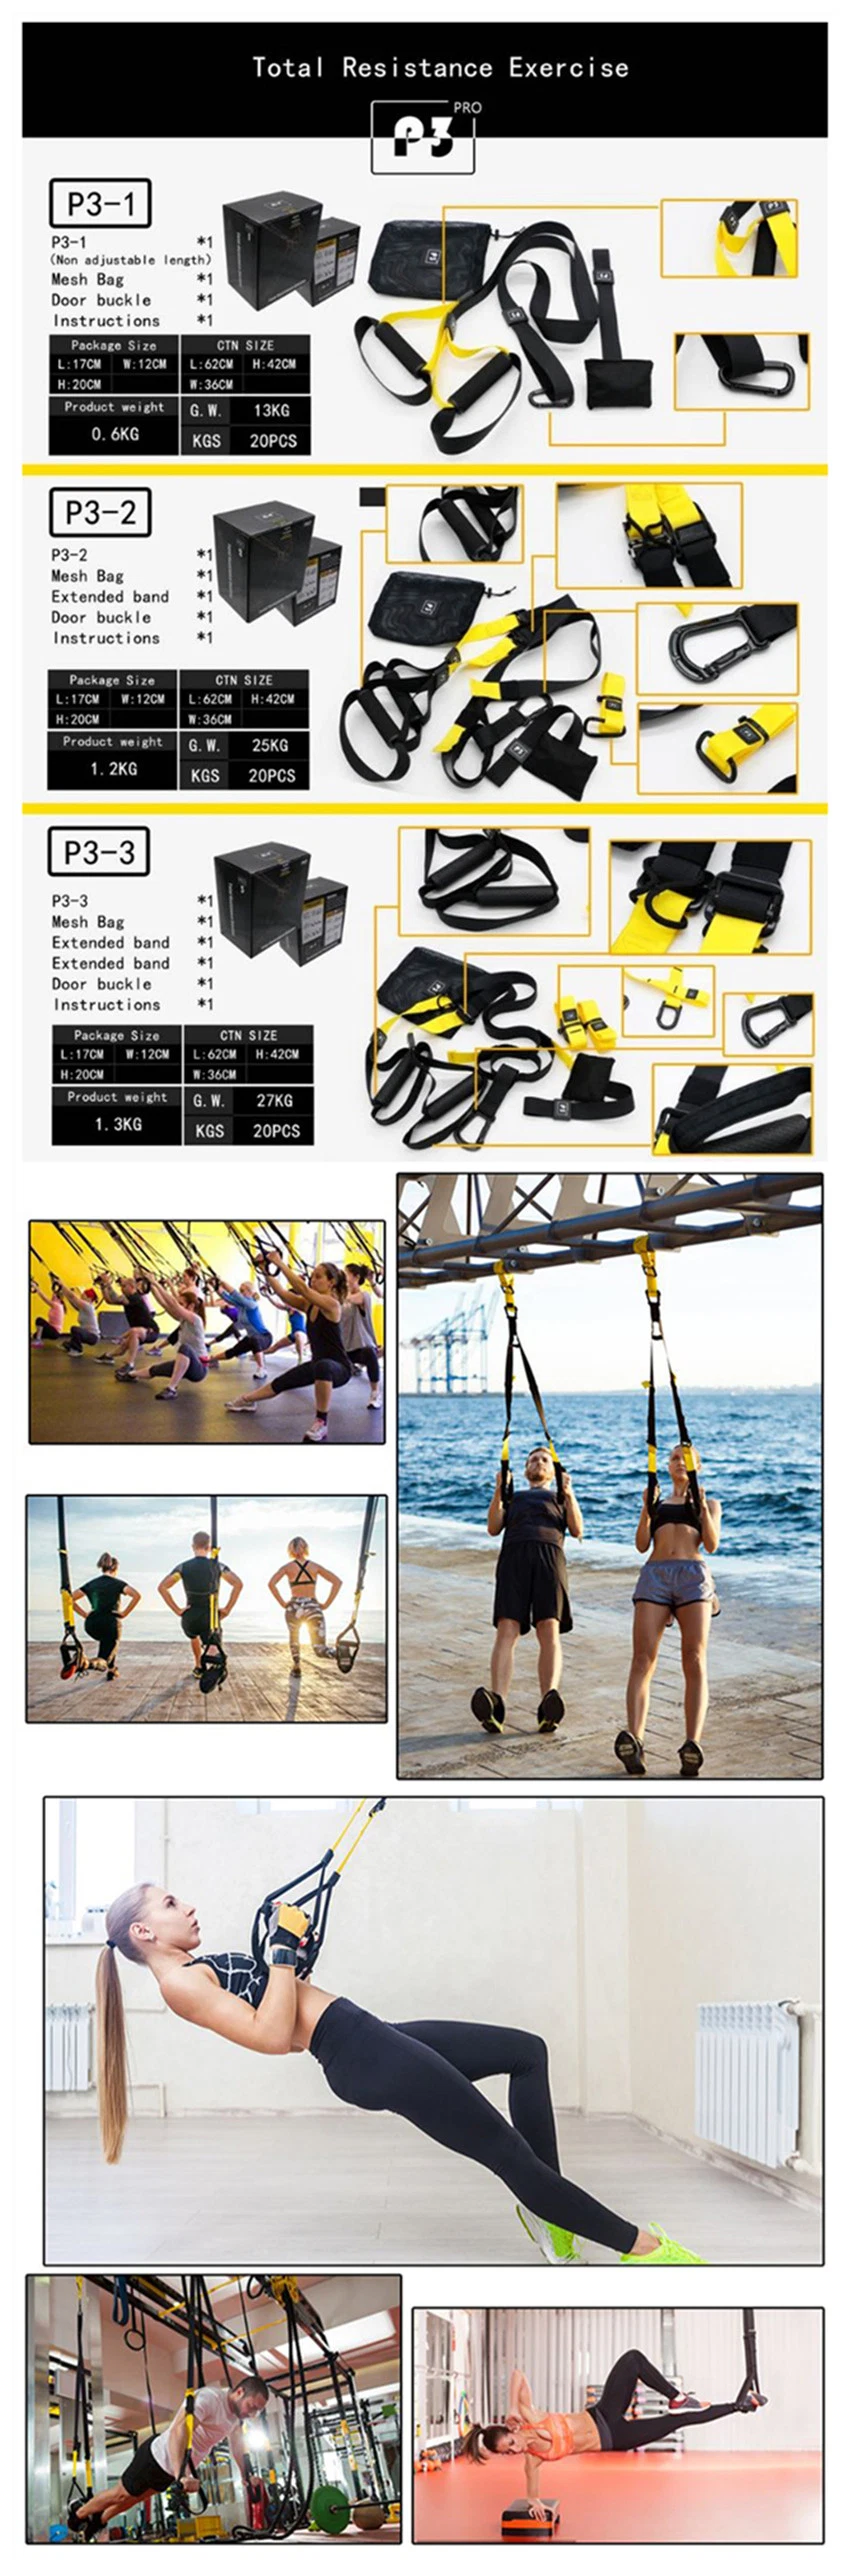 Wholesale Force Kit Training Strength Bands, Professional Suspension Trainer